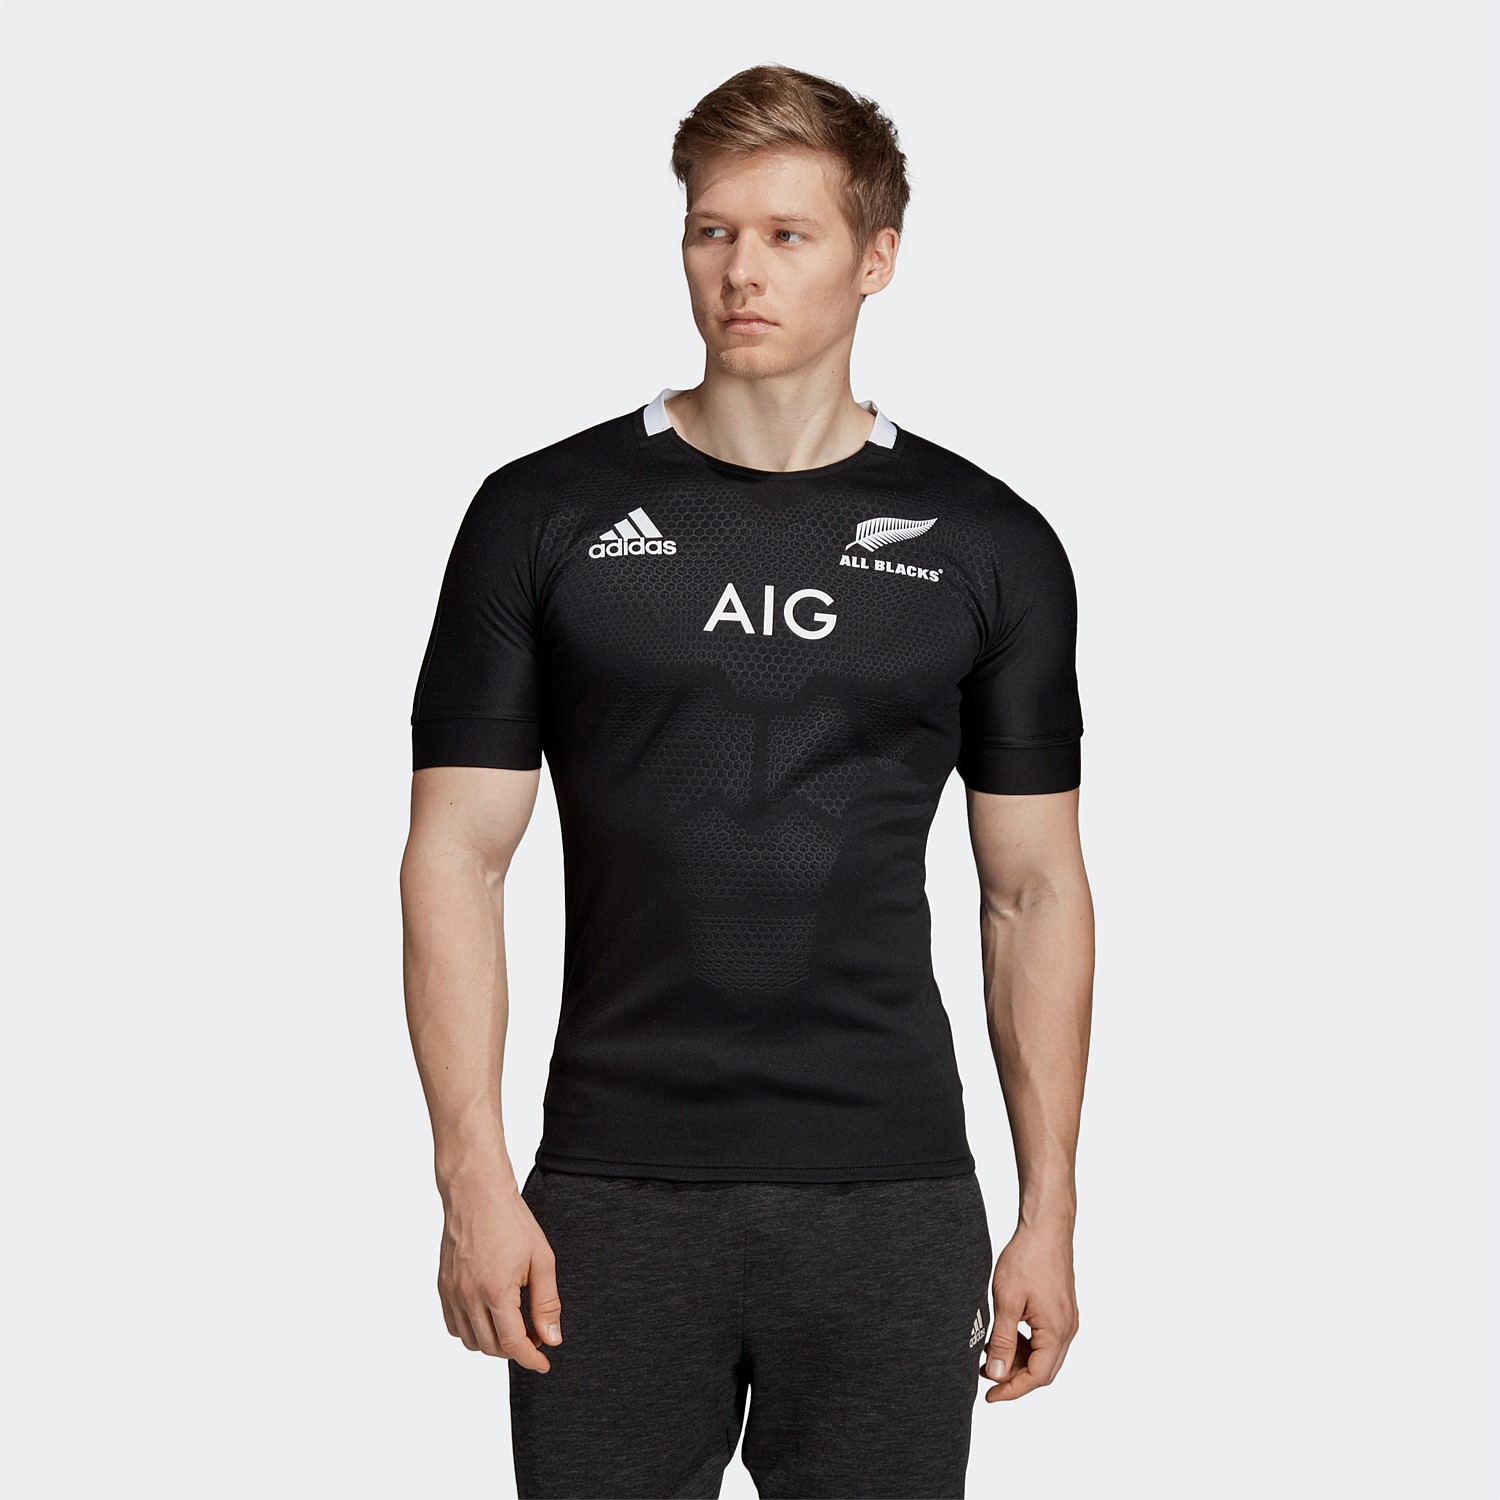 all black rugby jersey for sale